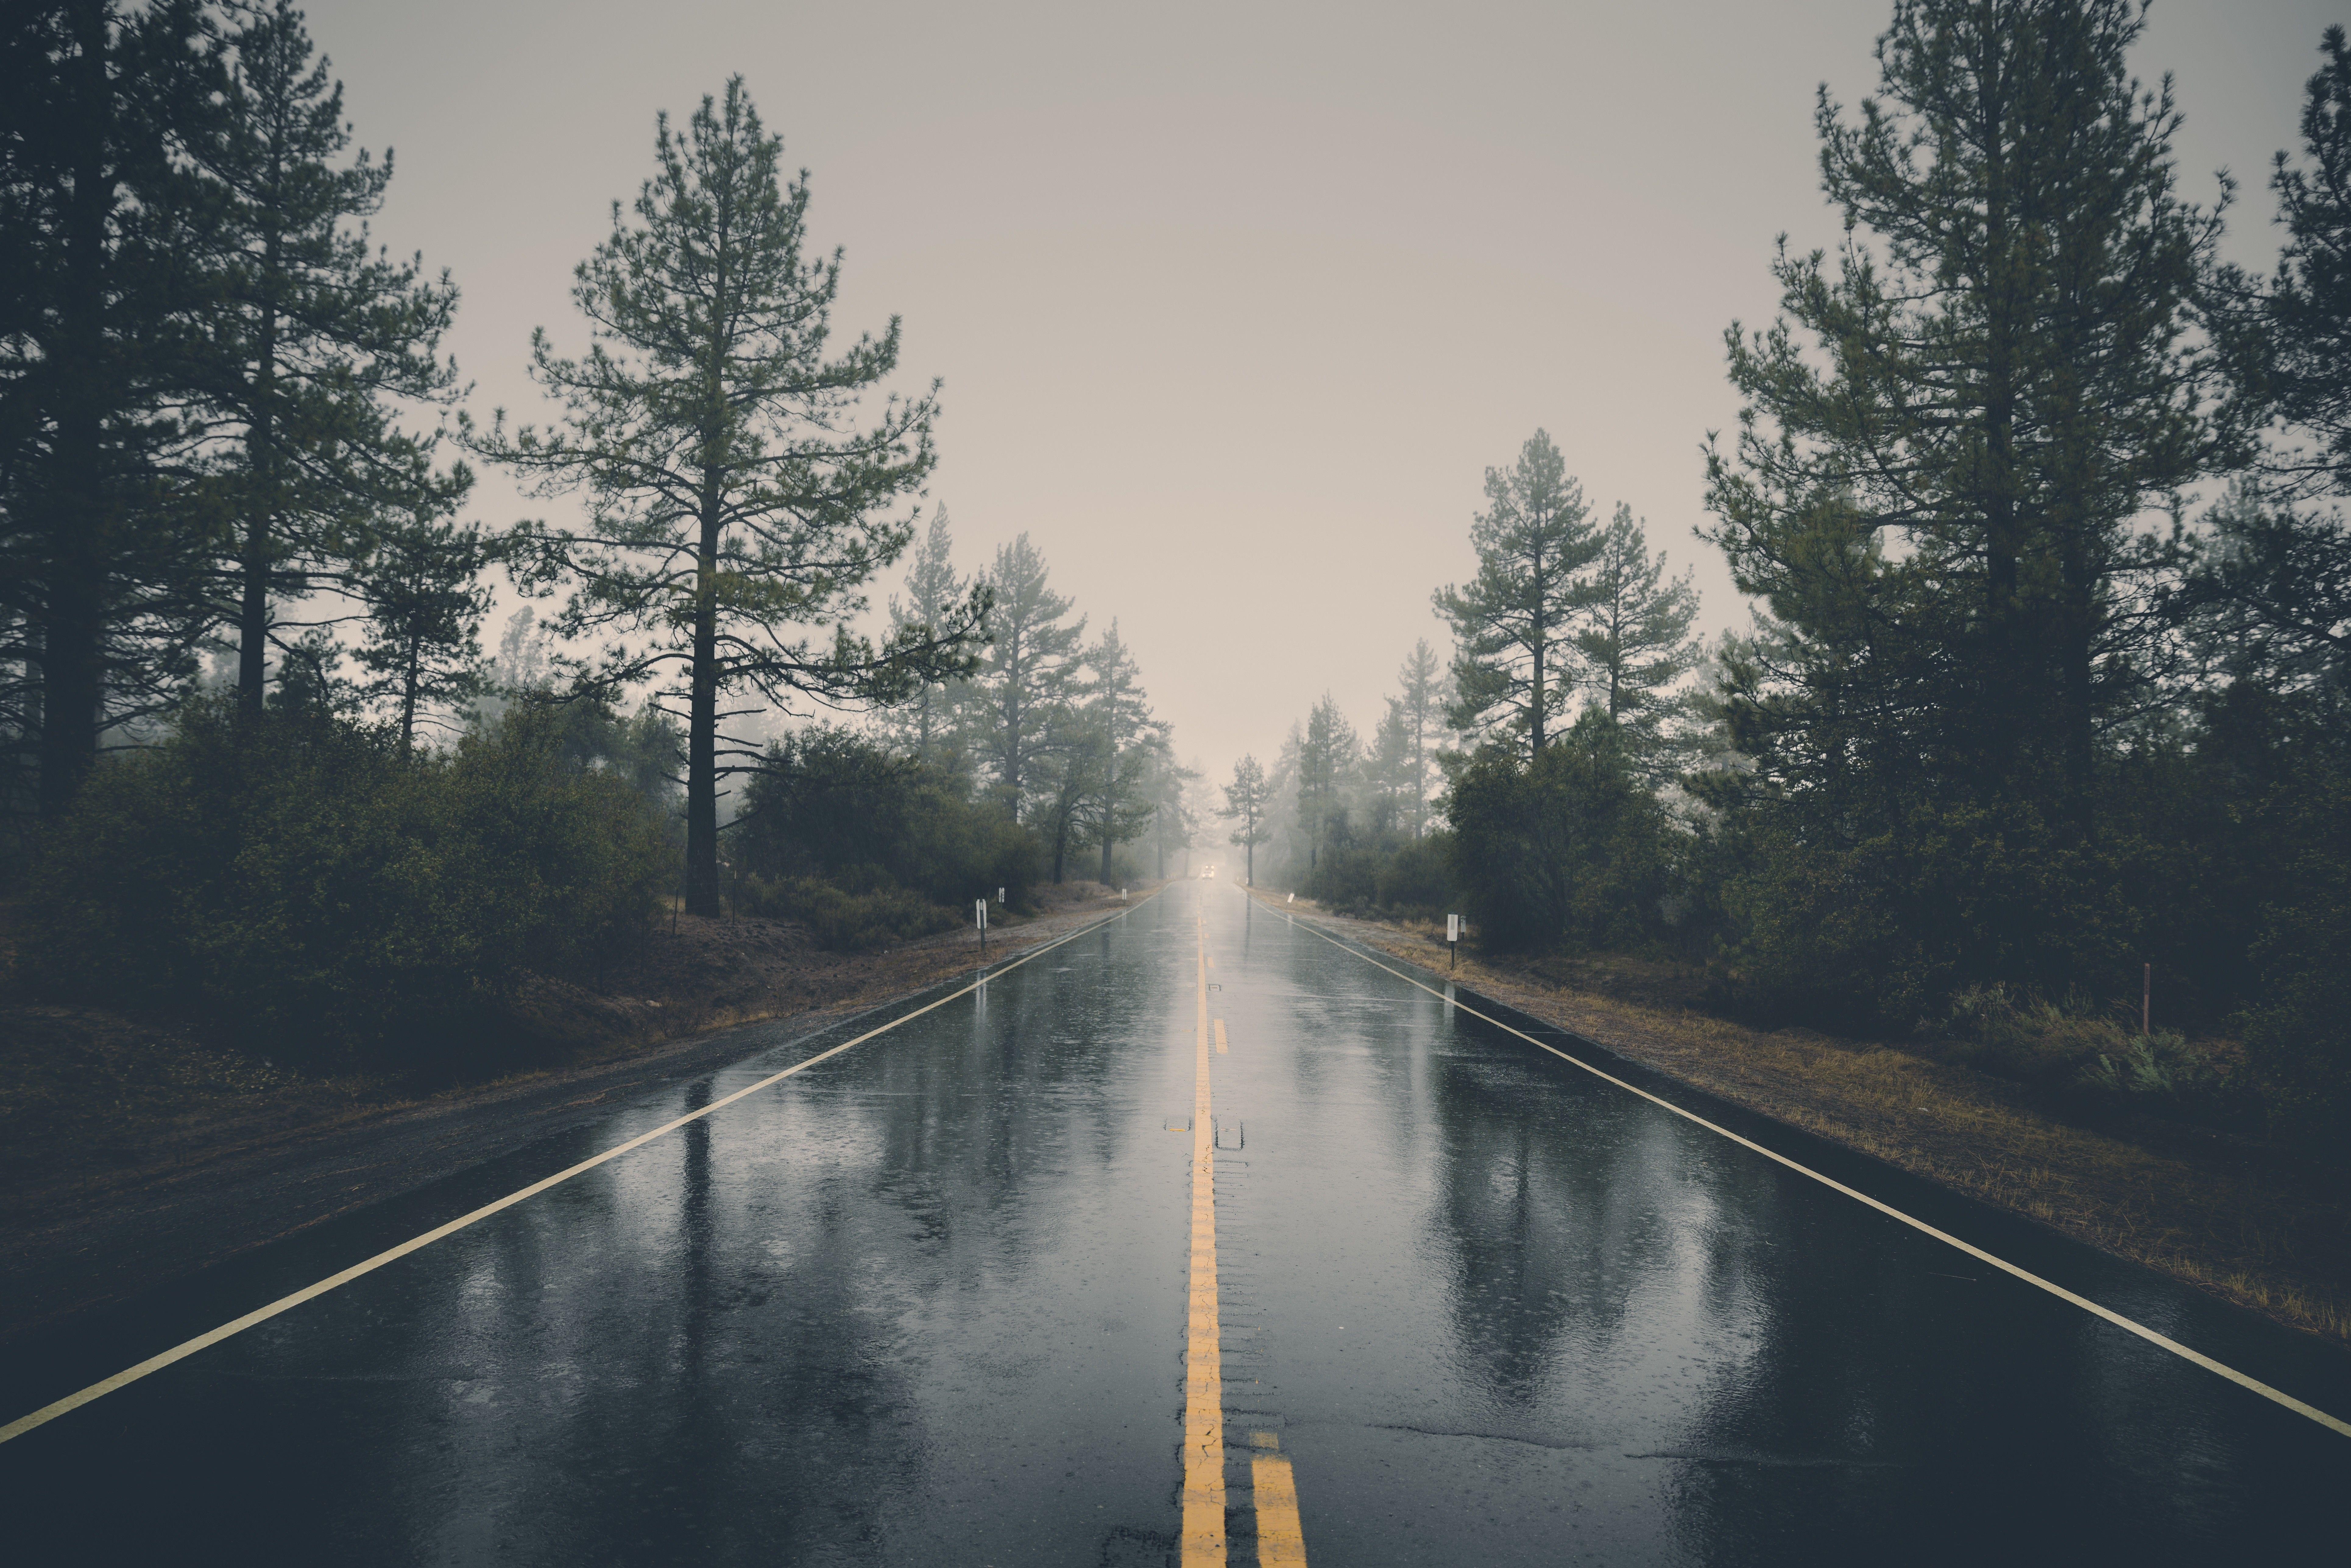 Download HD Wallpaper Of 405326 Nature, Road, Trees, Reflection, Wet, Rain. Free Download High Quality And Wides. Rain Wallpaper, Wallpaper Pc, Laptop Wallpaper